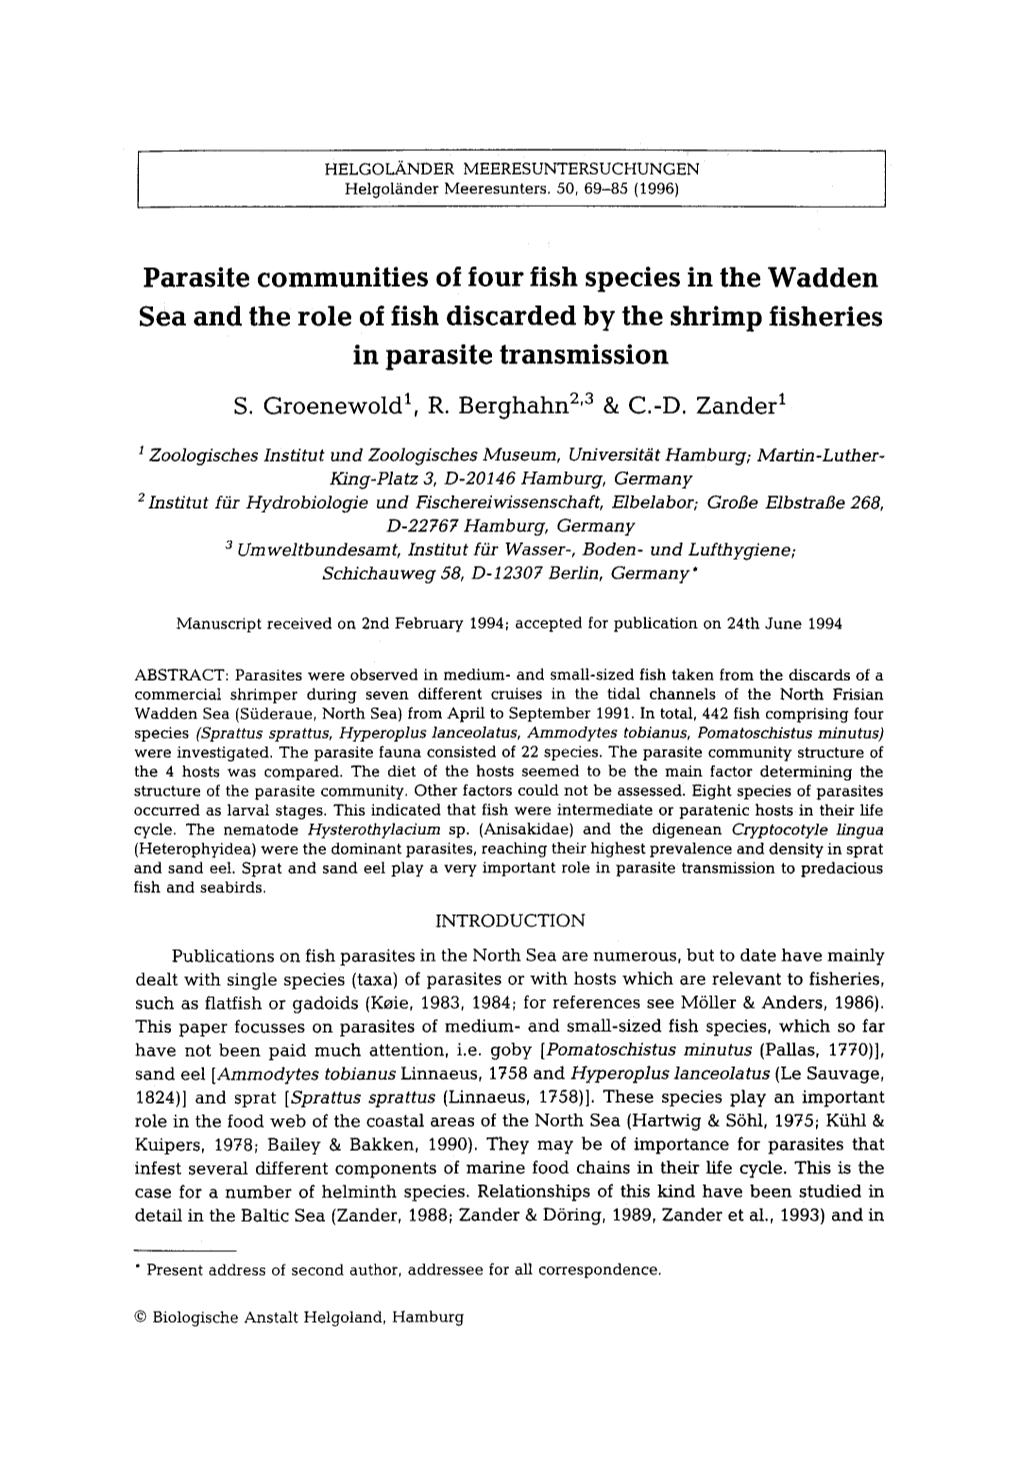 Parasite Communities of Four Fish Species in the Wadden Sea and the Role of Fish Discarded by the Shrimp Fisheries in Parasite Transmission